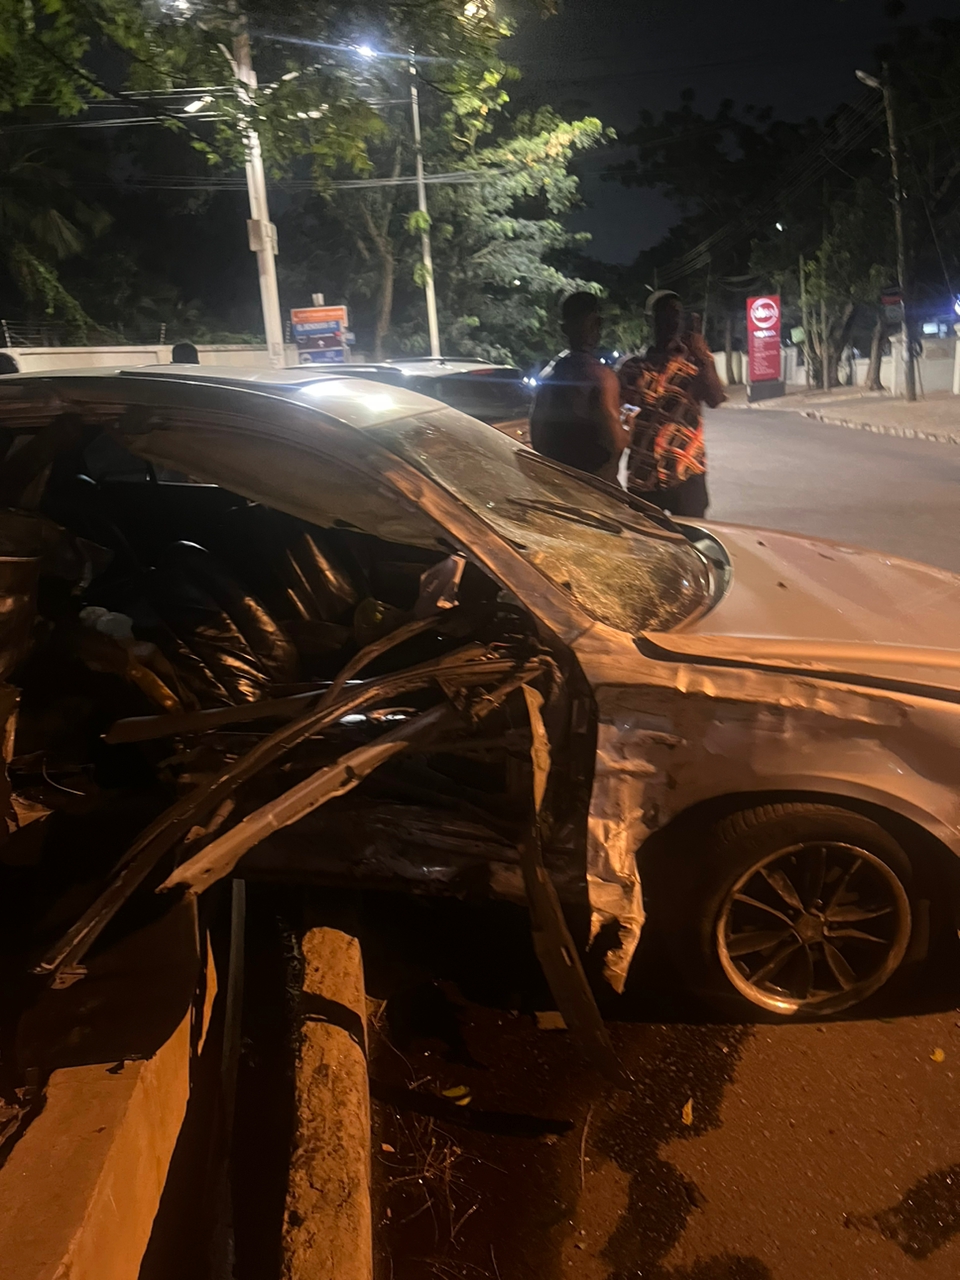 Nanton MP was speeding – Driver whose car was hit recounts incident